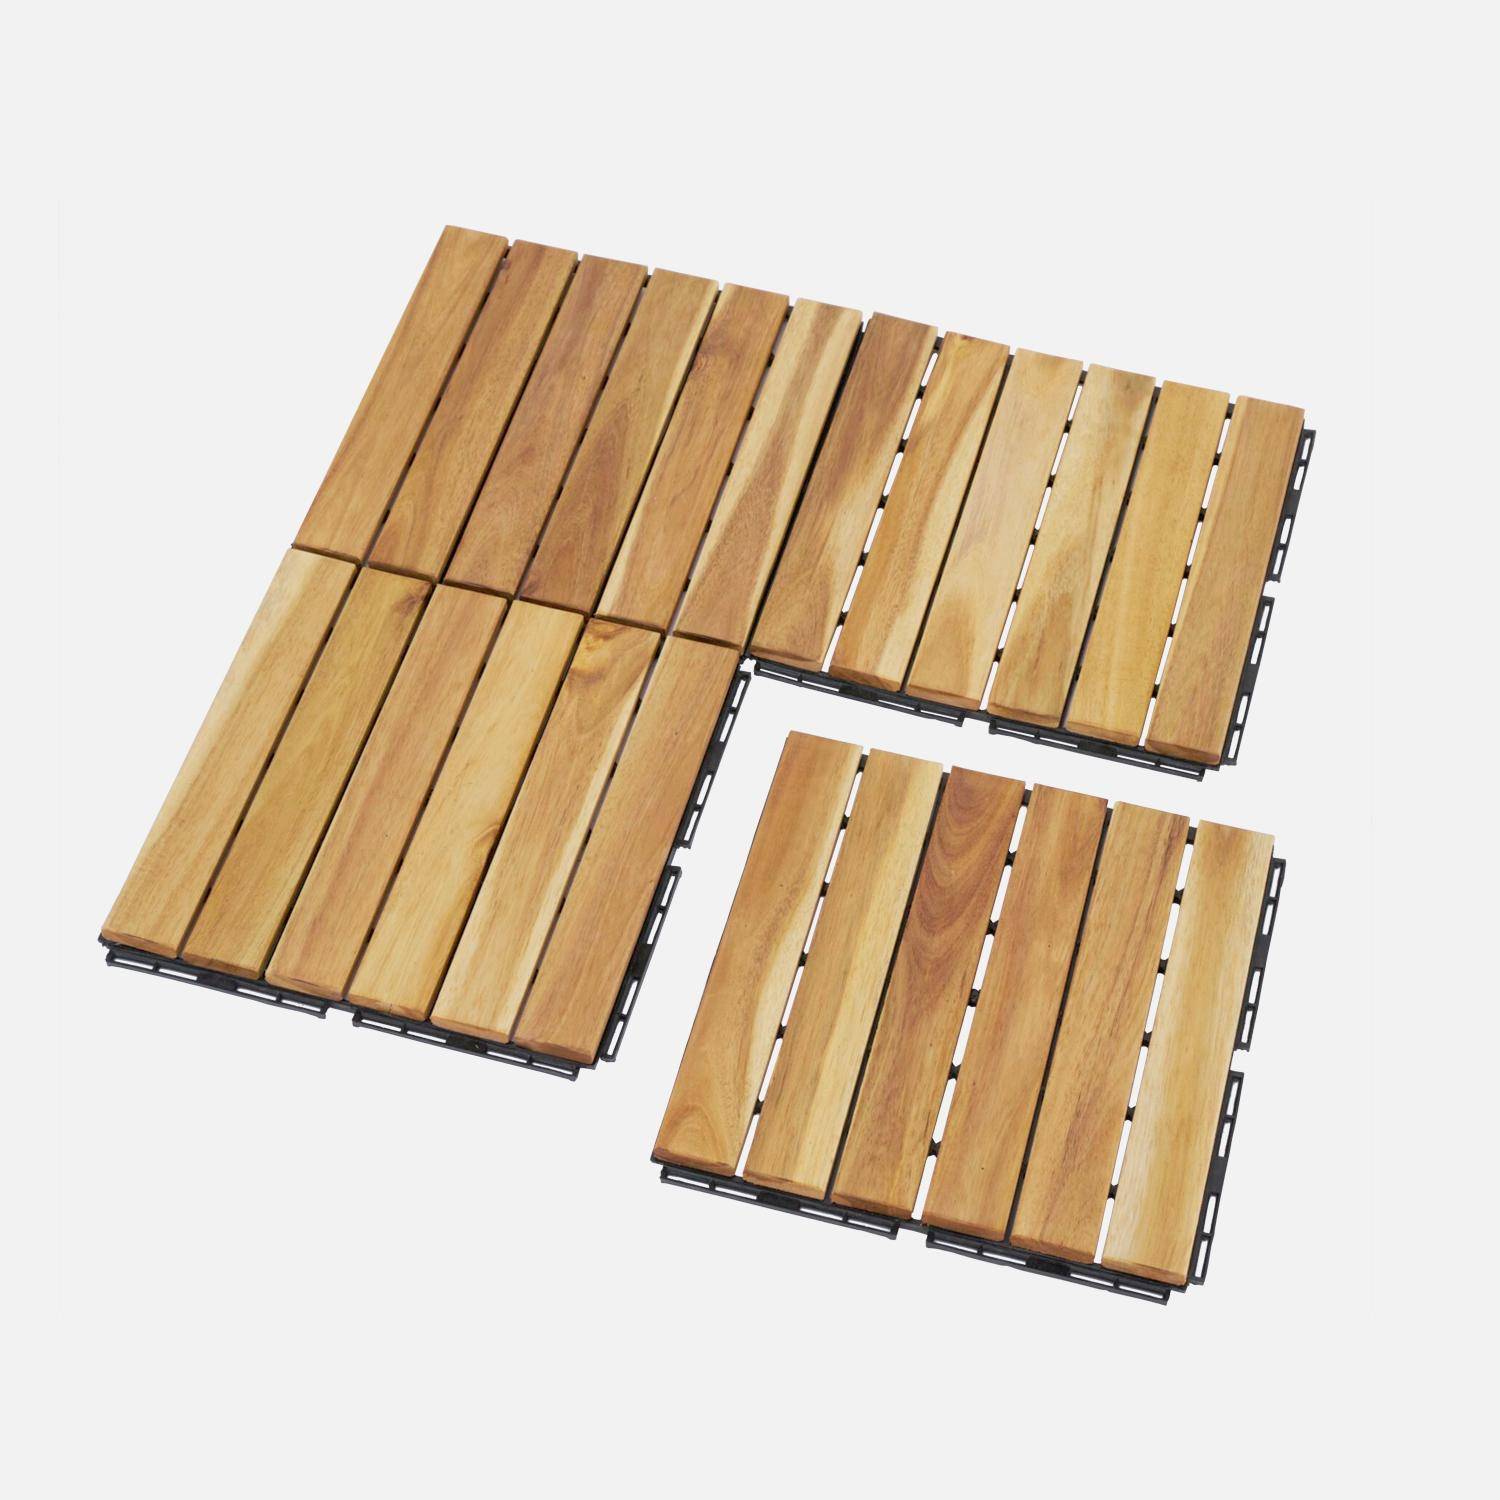 Batch of 36 acacia wood decking tiles 30x30cm, linear pattern, slatted, clip-on Photo3